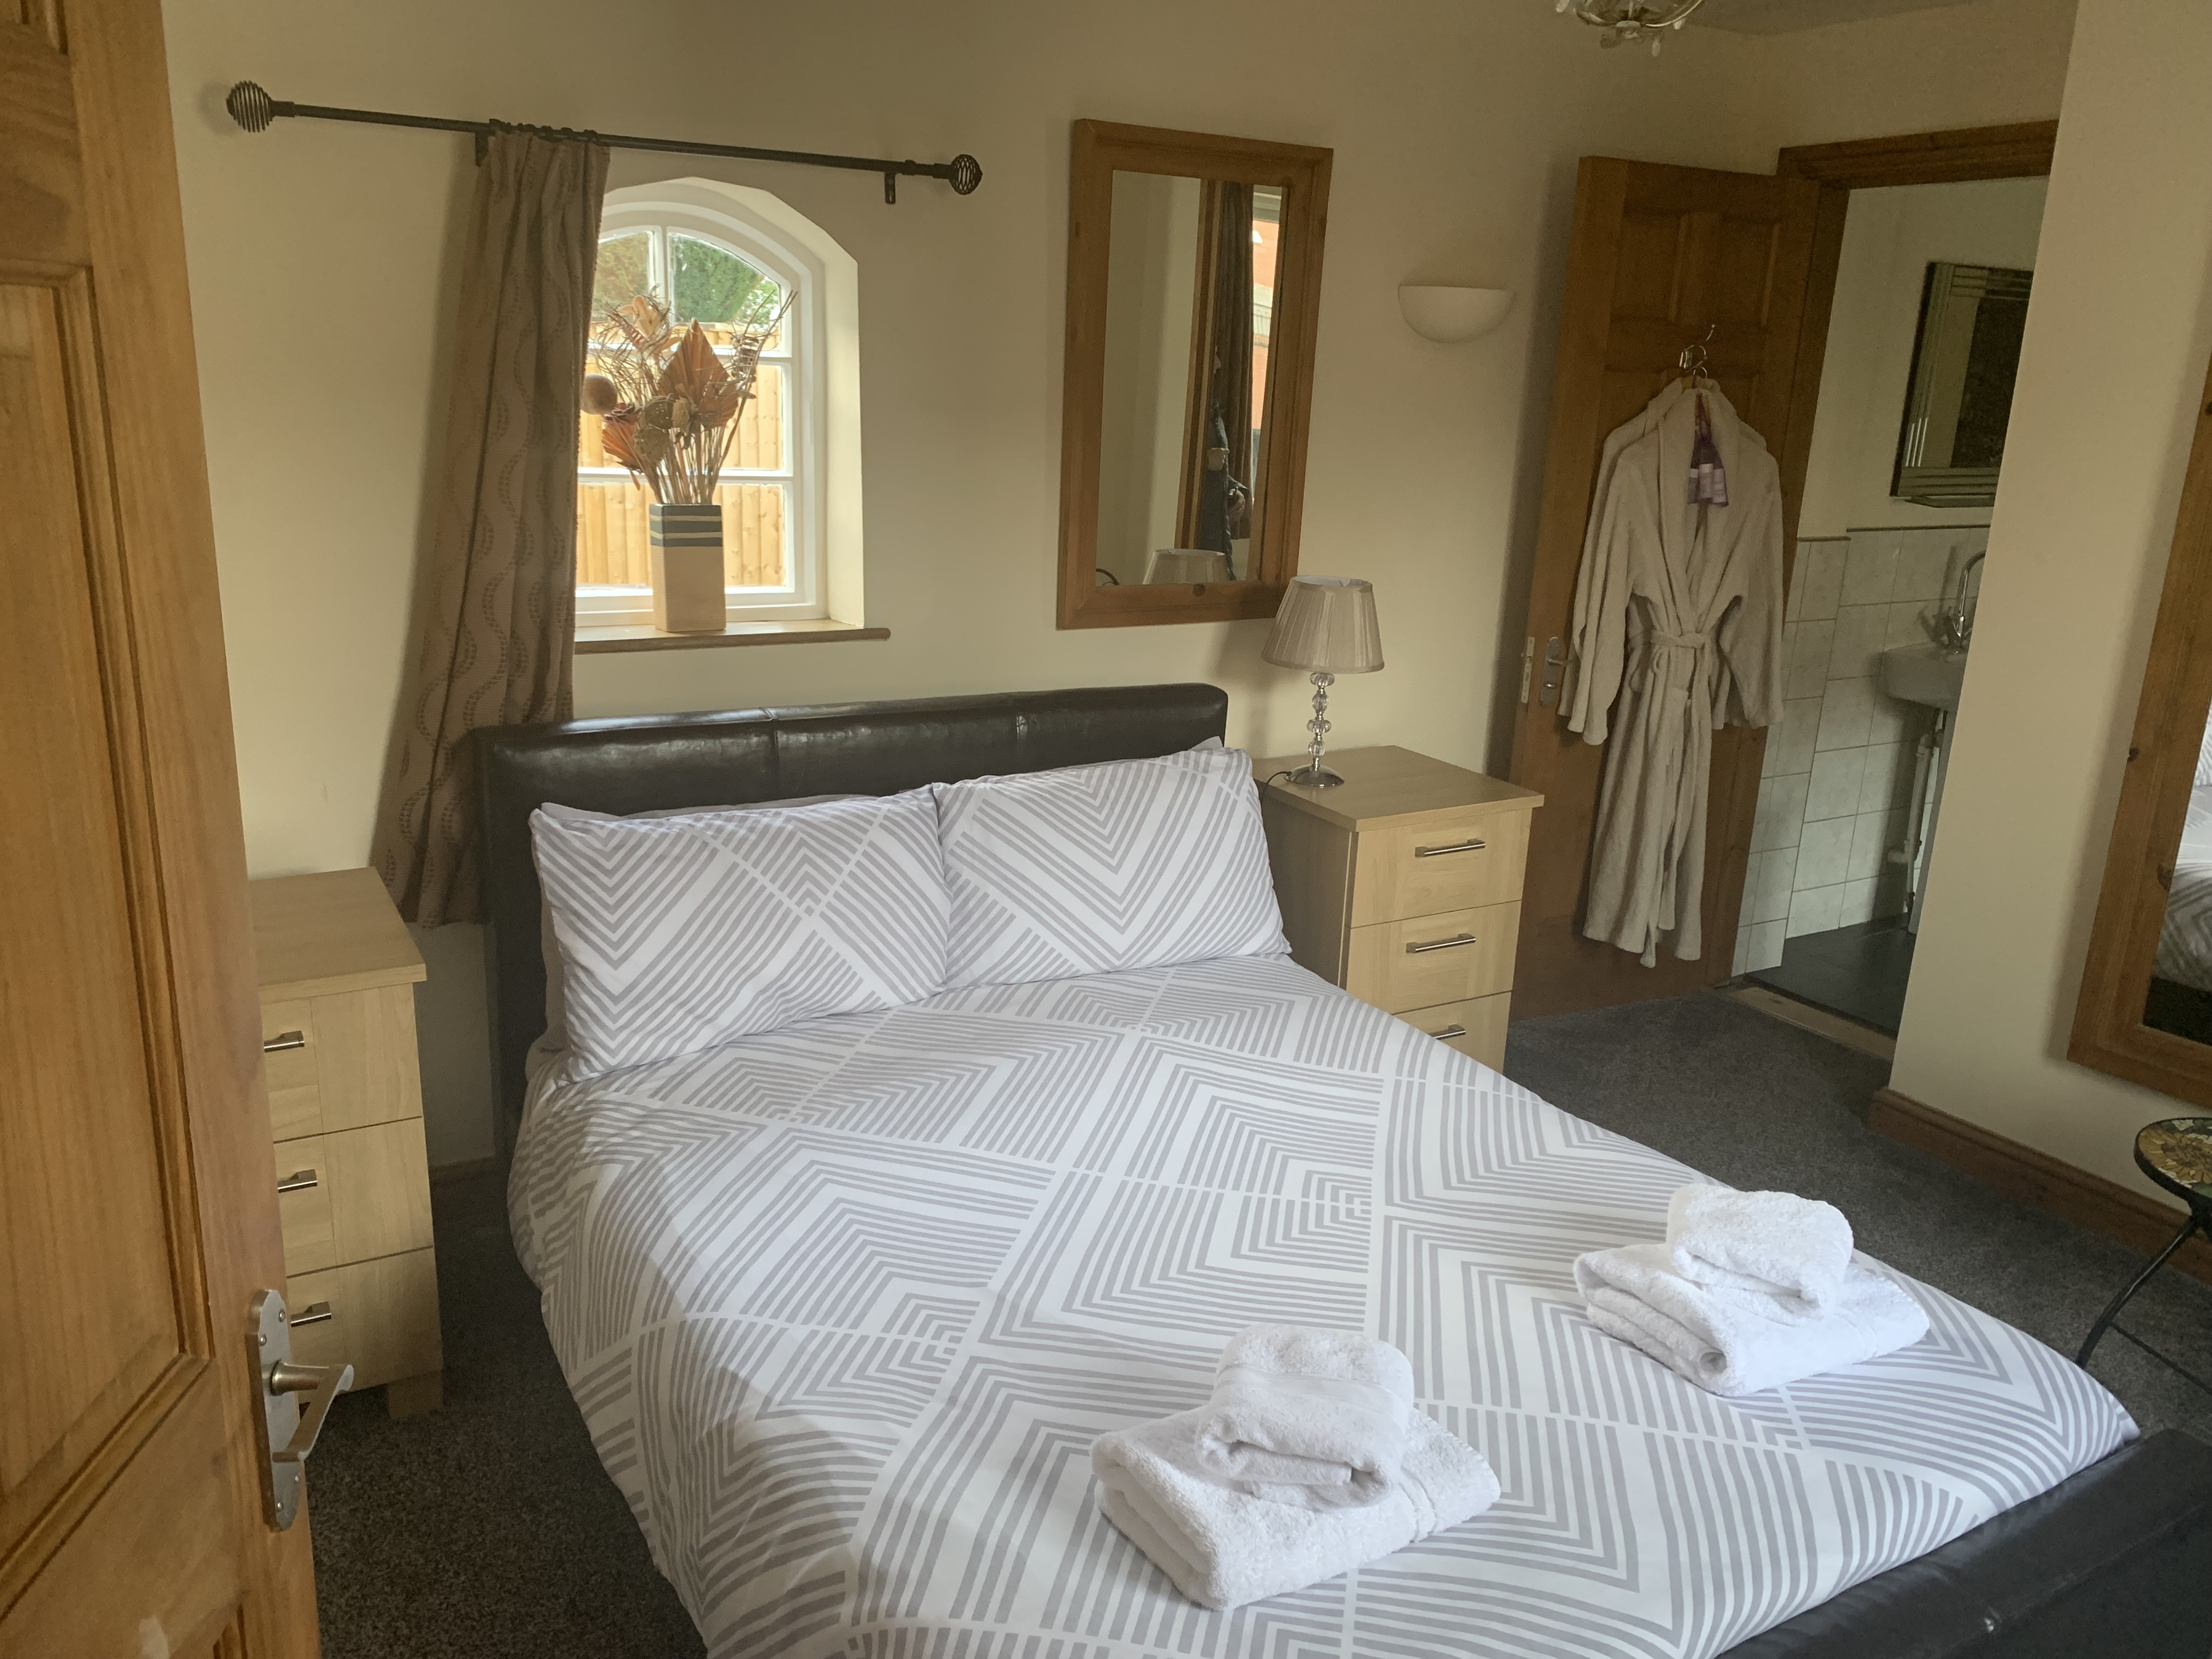 Double bed in cottage bedroom